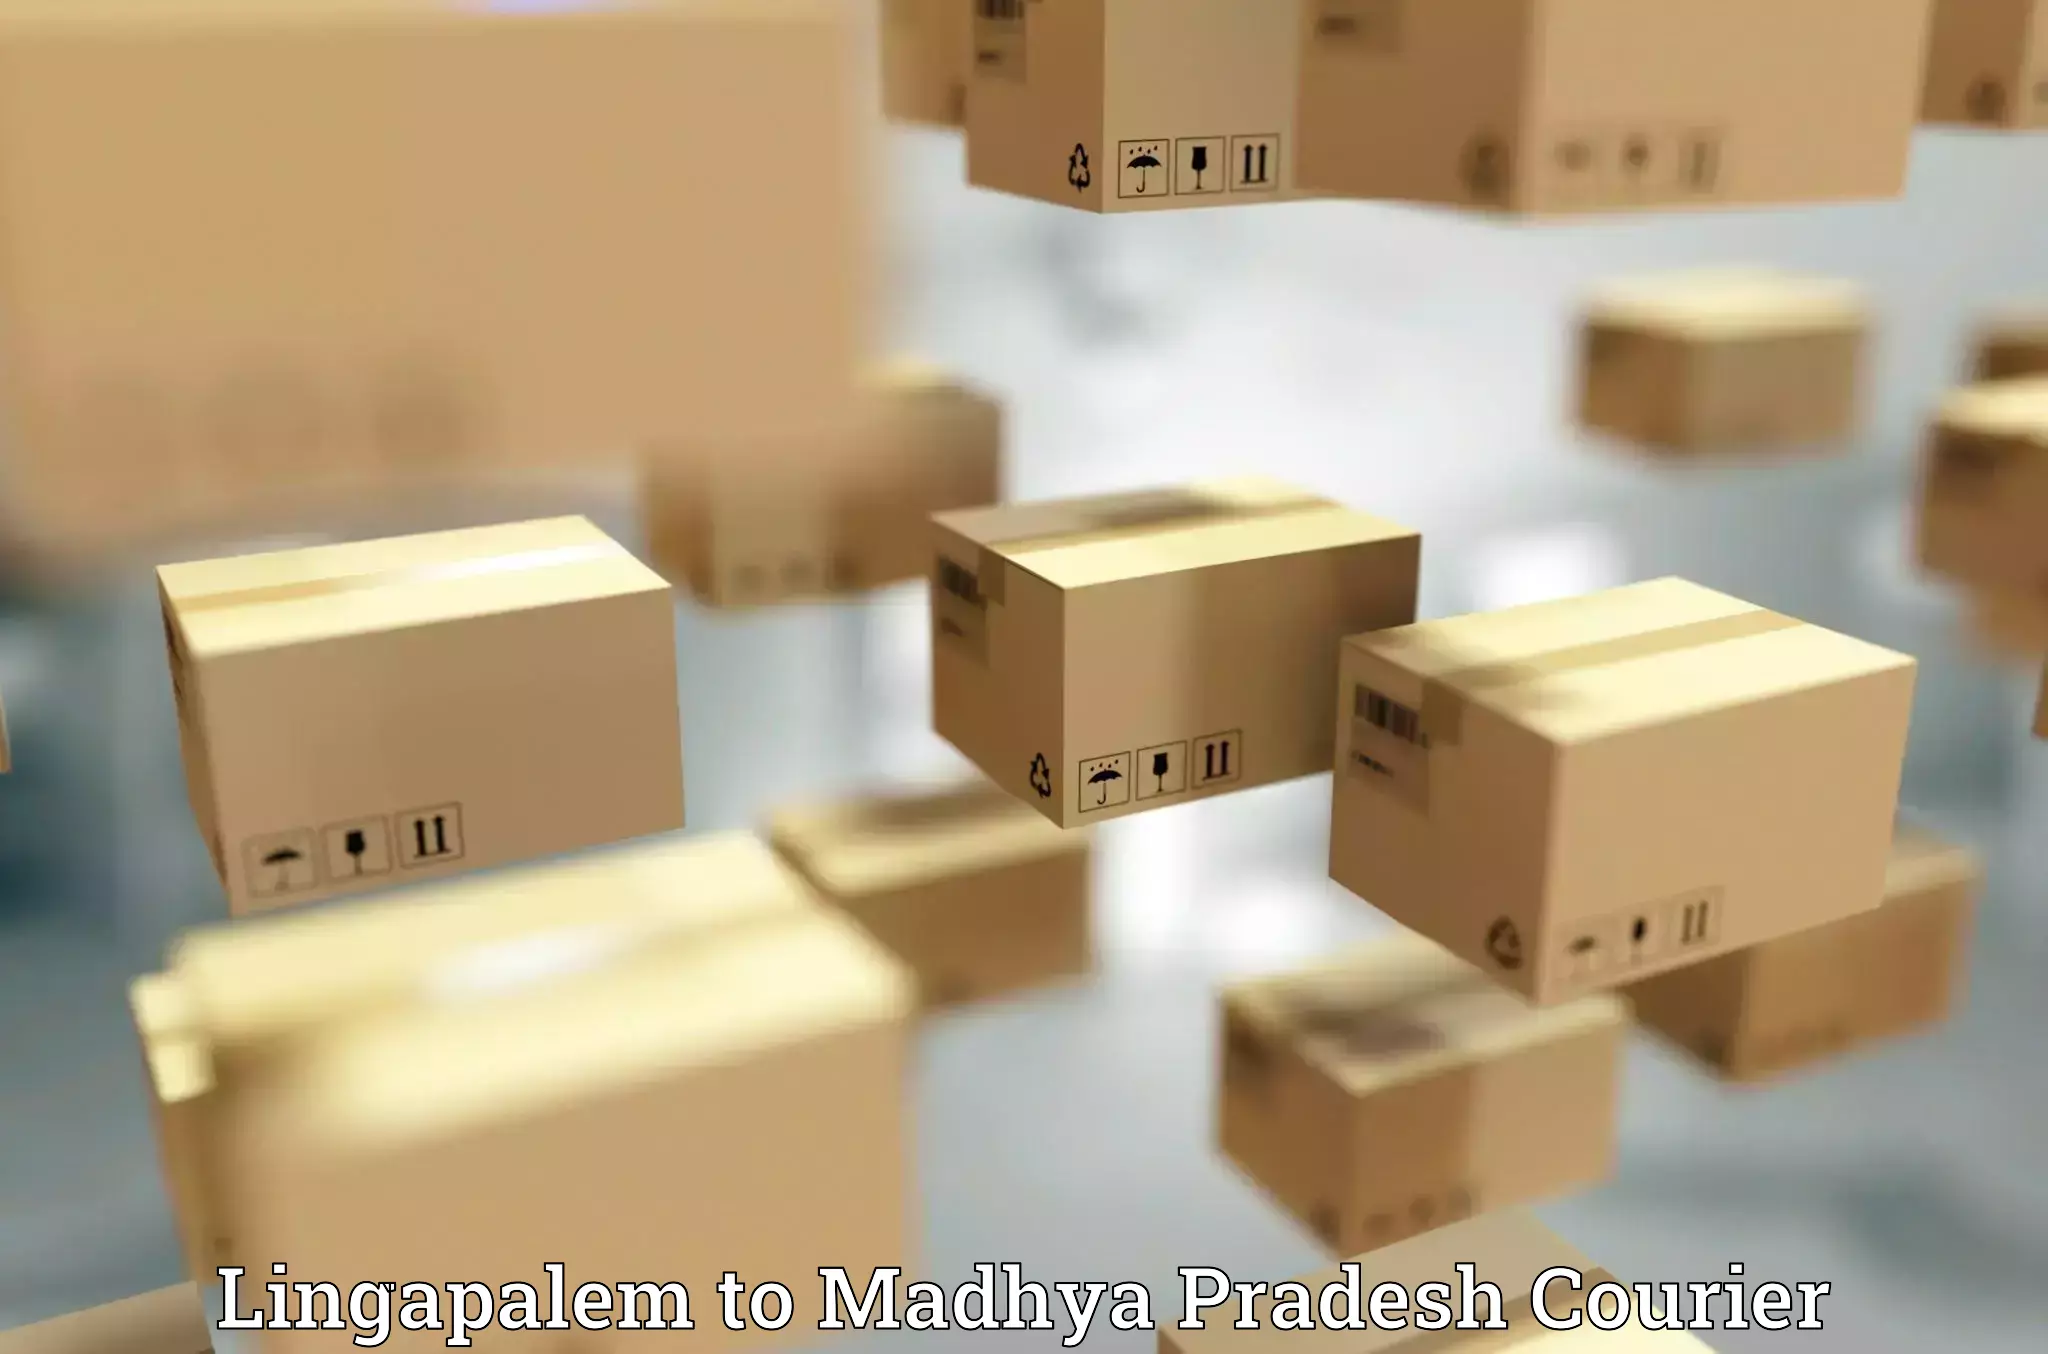 Residential courier service Lingapalem to Madhya Pradesh